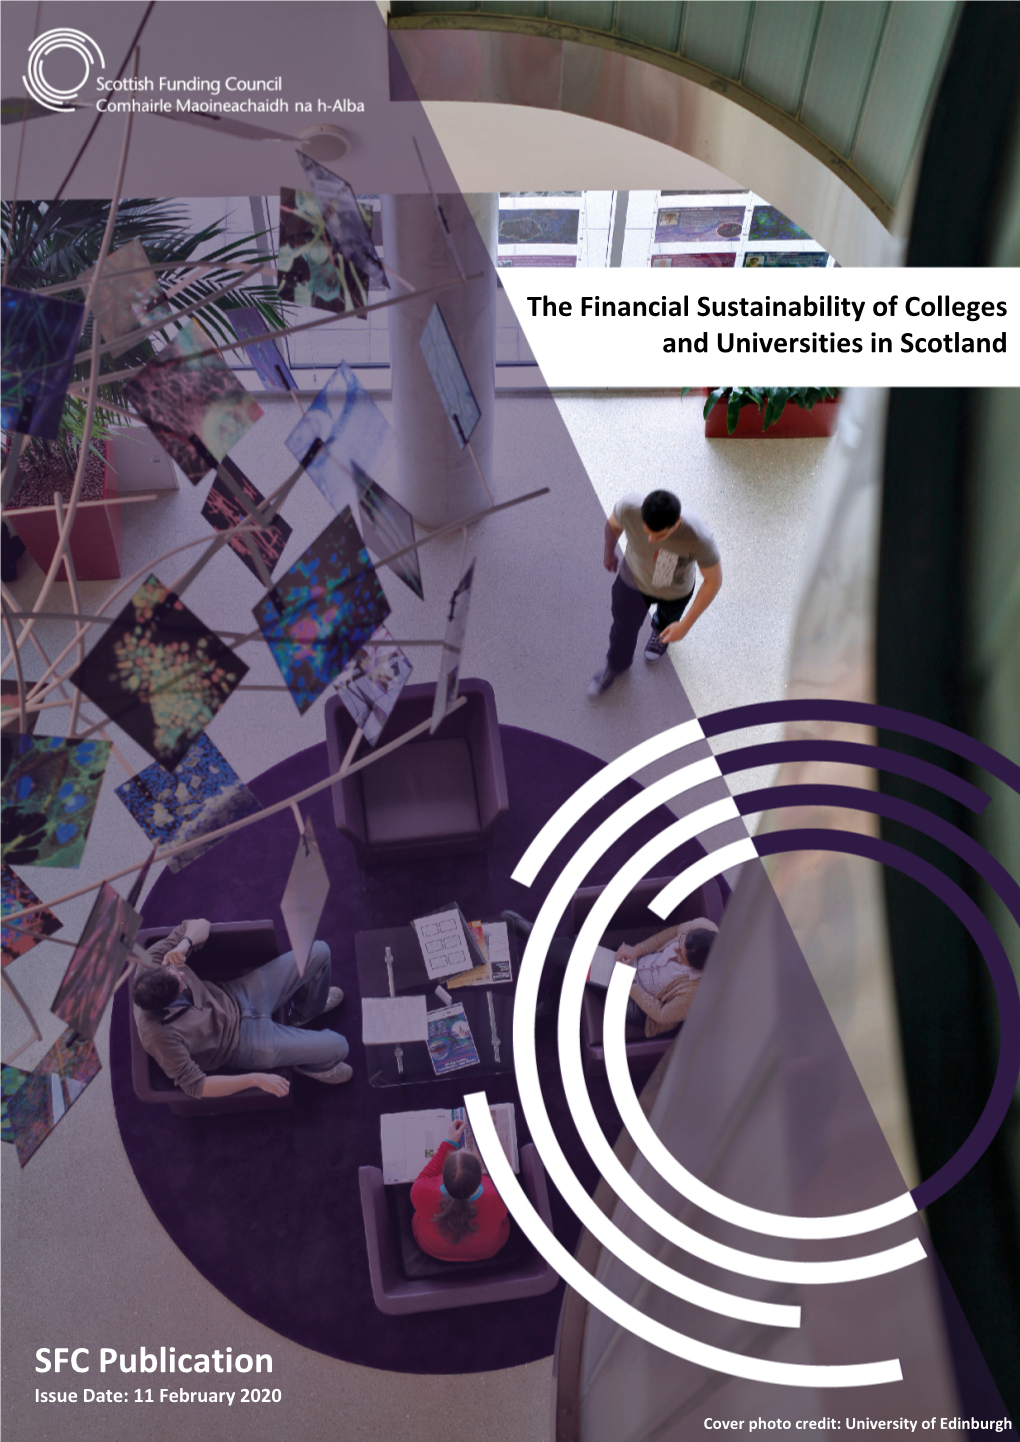 The Financial Sustainability of Colleges and Universities in Scotland